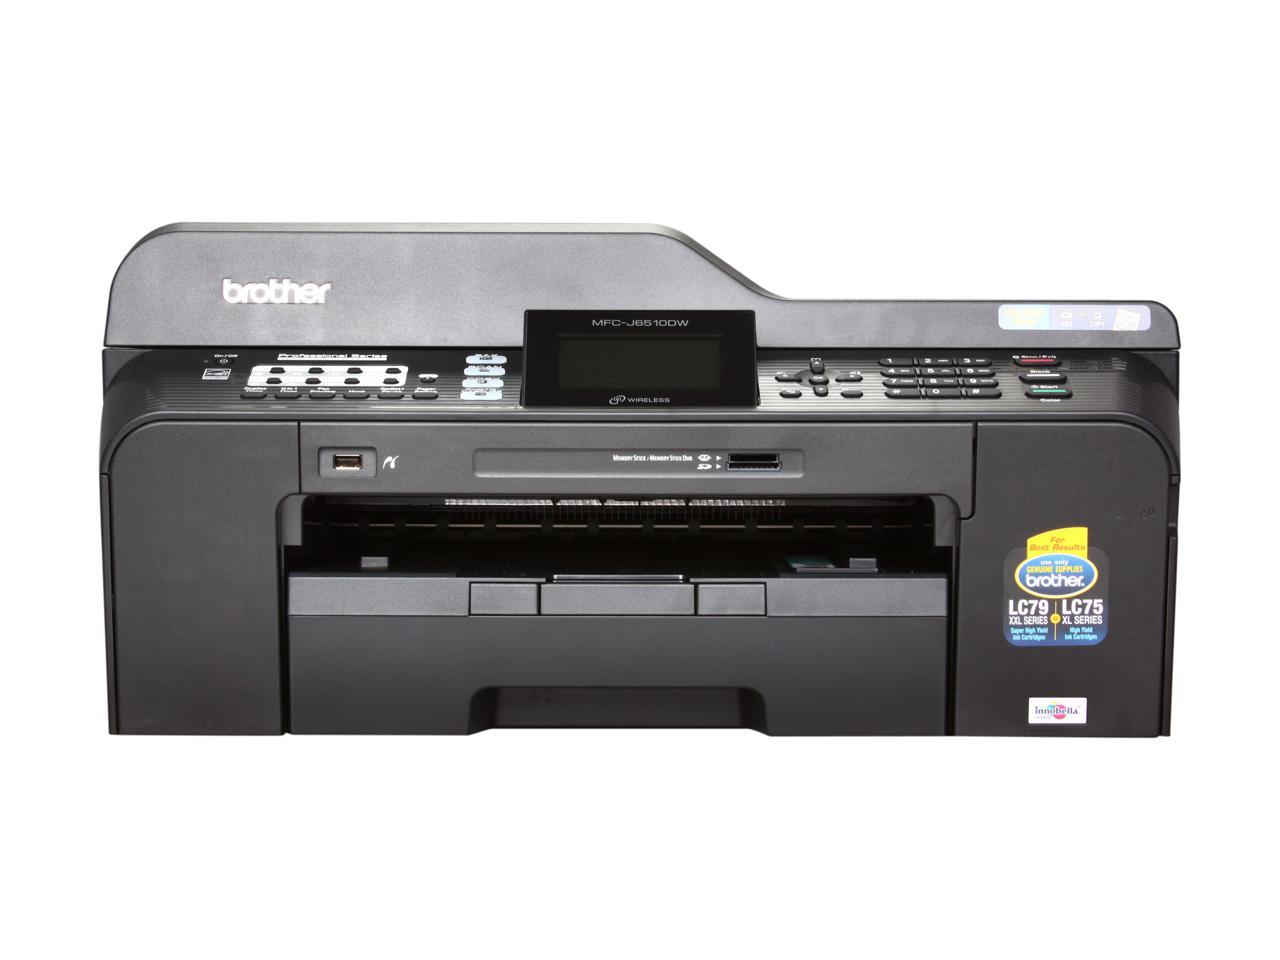 Brother Professional Series Mfc J6510dw Inkjet All In One Printer With Up To 11 X 17 Duplex 4629